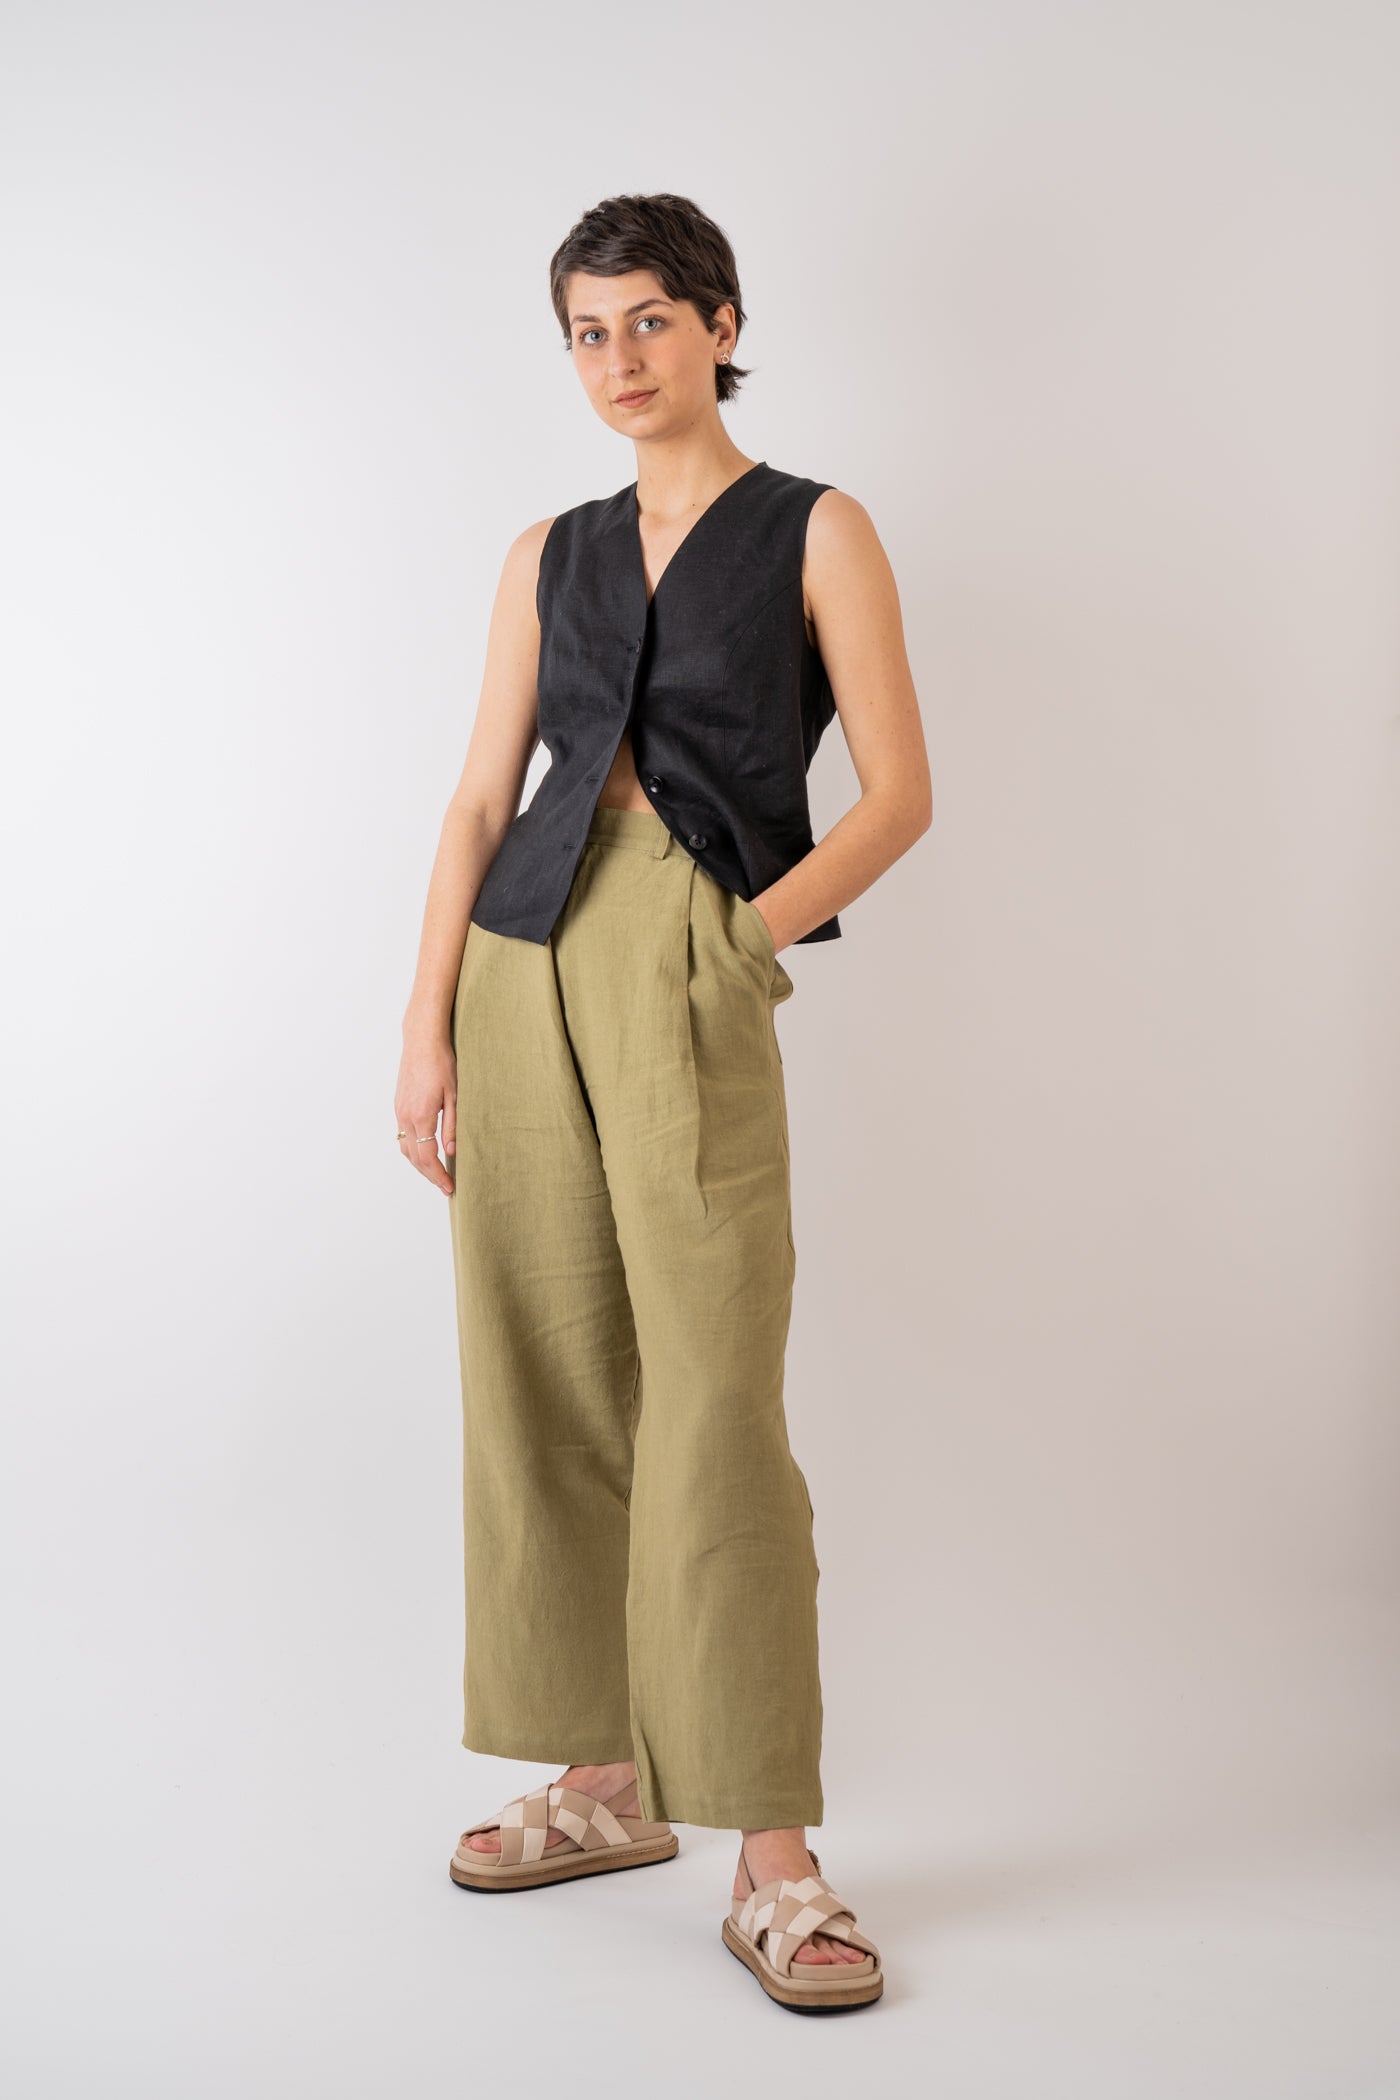 Xi Atelier Linen Avery Waistcoat in black and handmade in Glasgow styled with Cawley Studio Linen Georgia Trouser